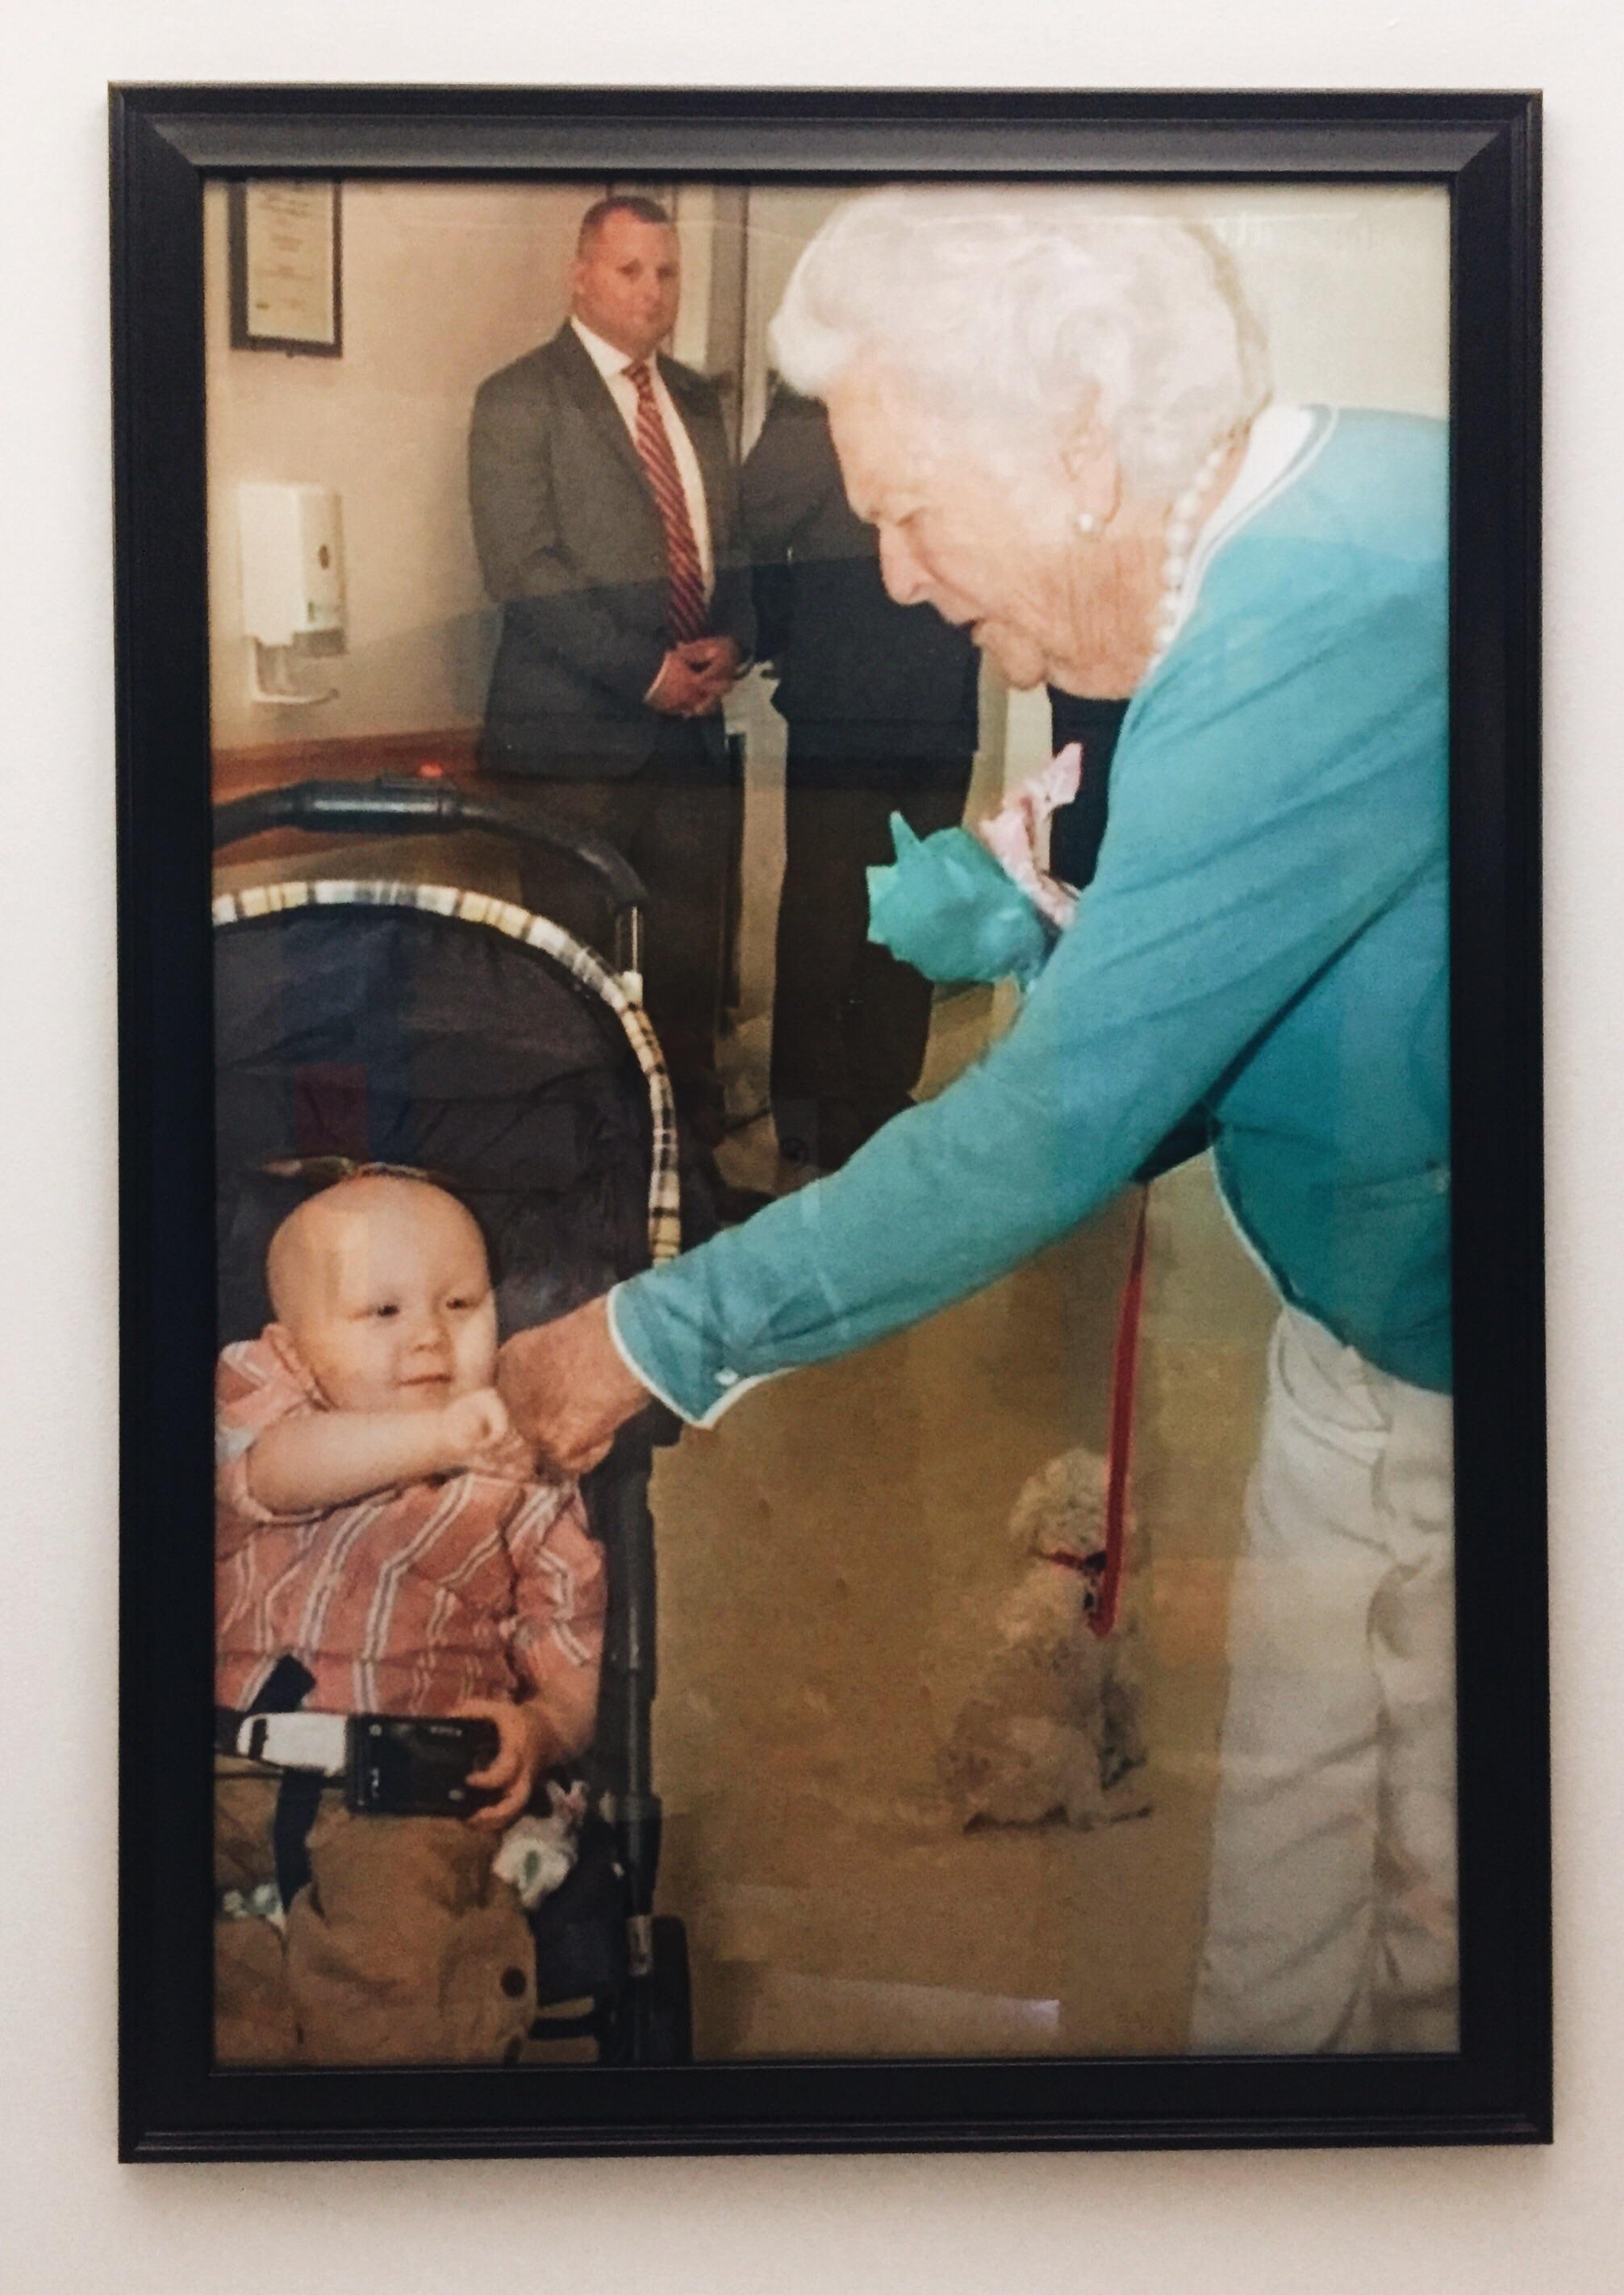 This picture hangs in the Barbara Bush Children's Hospital.